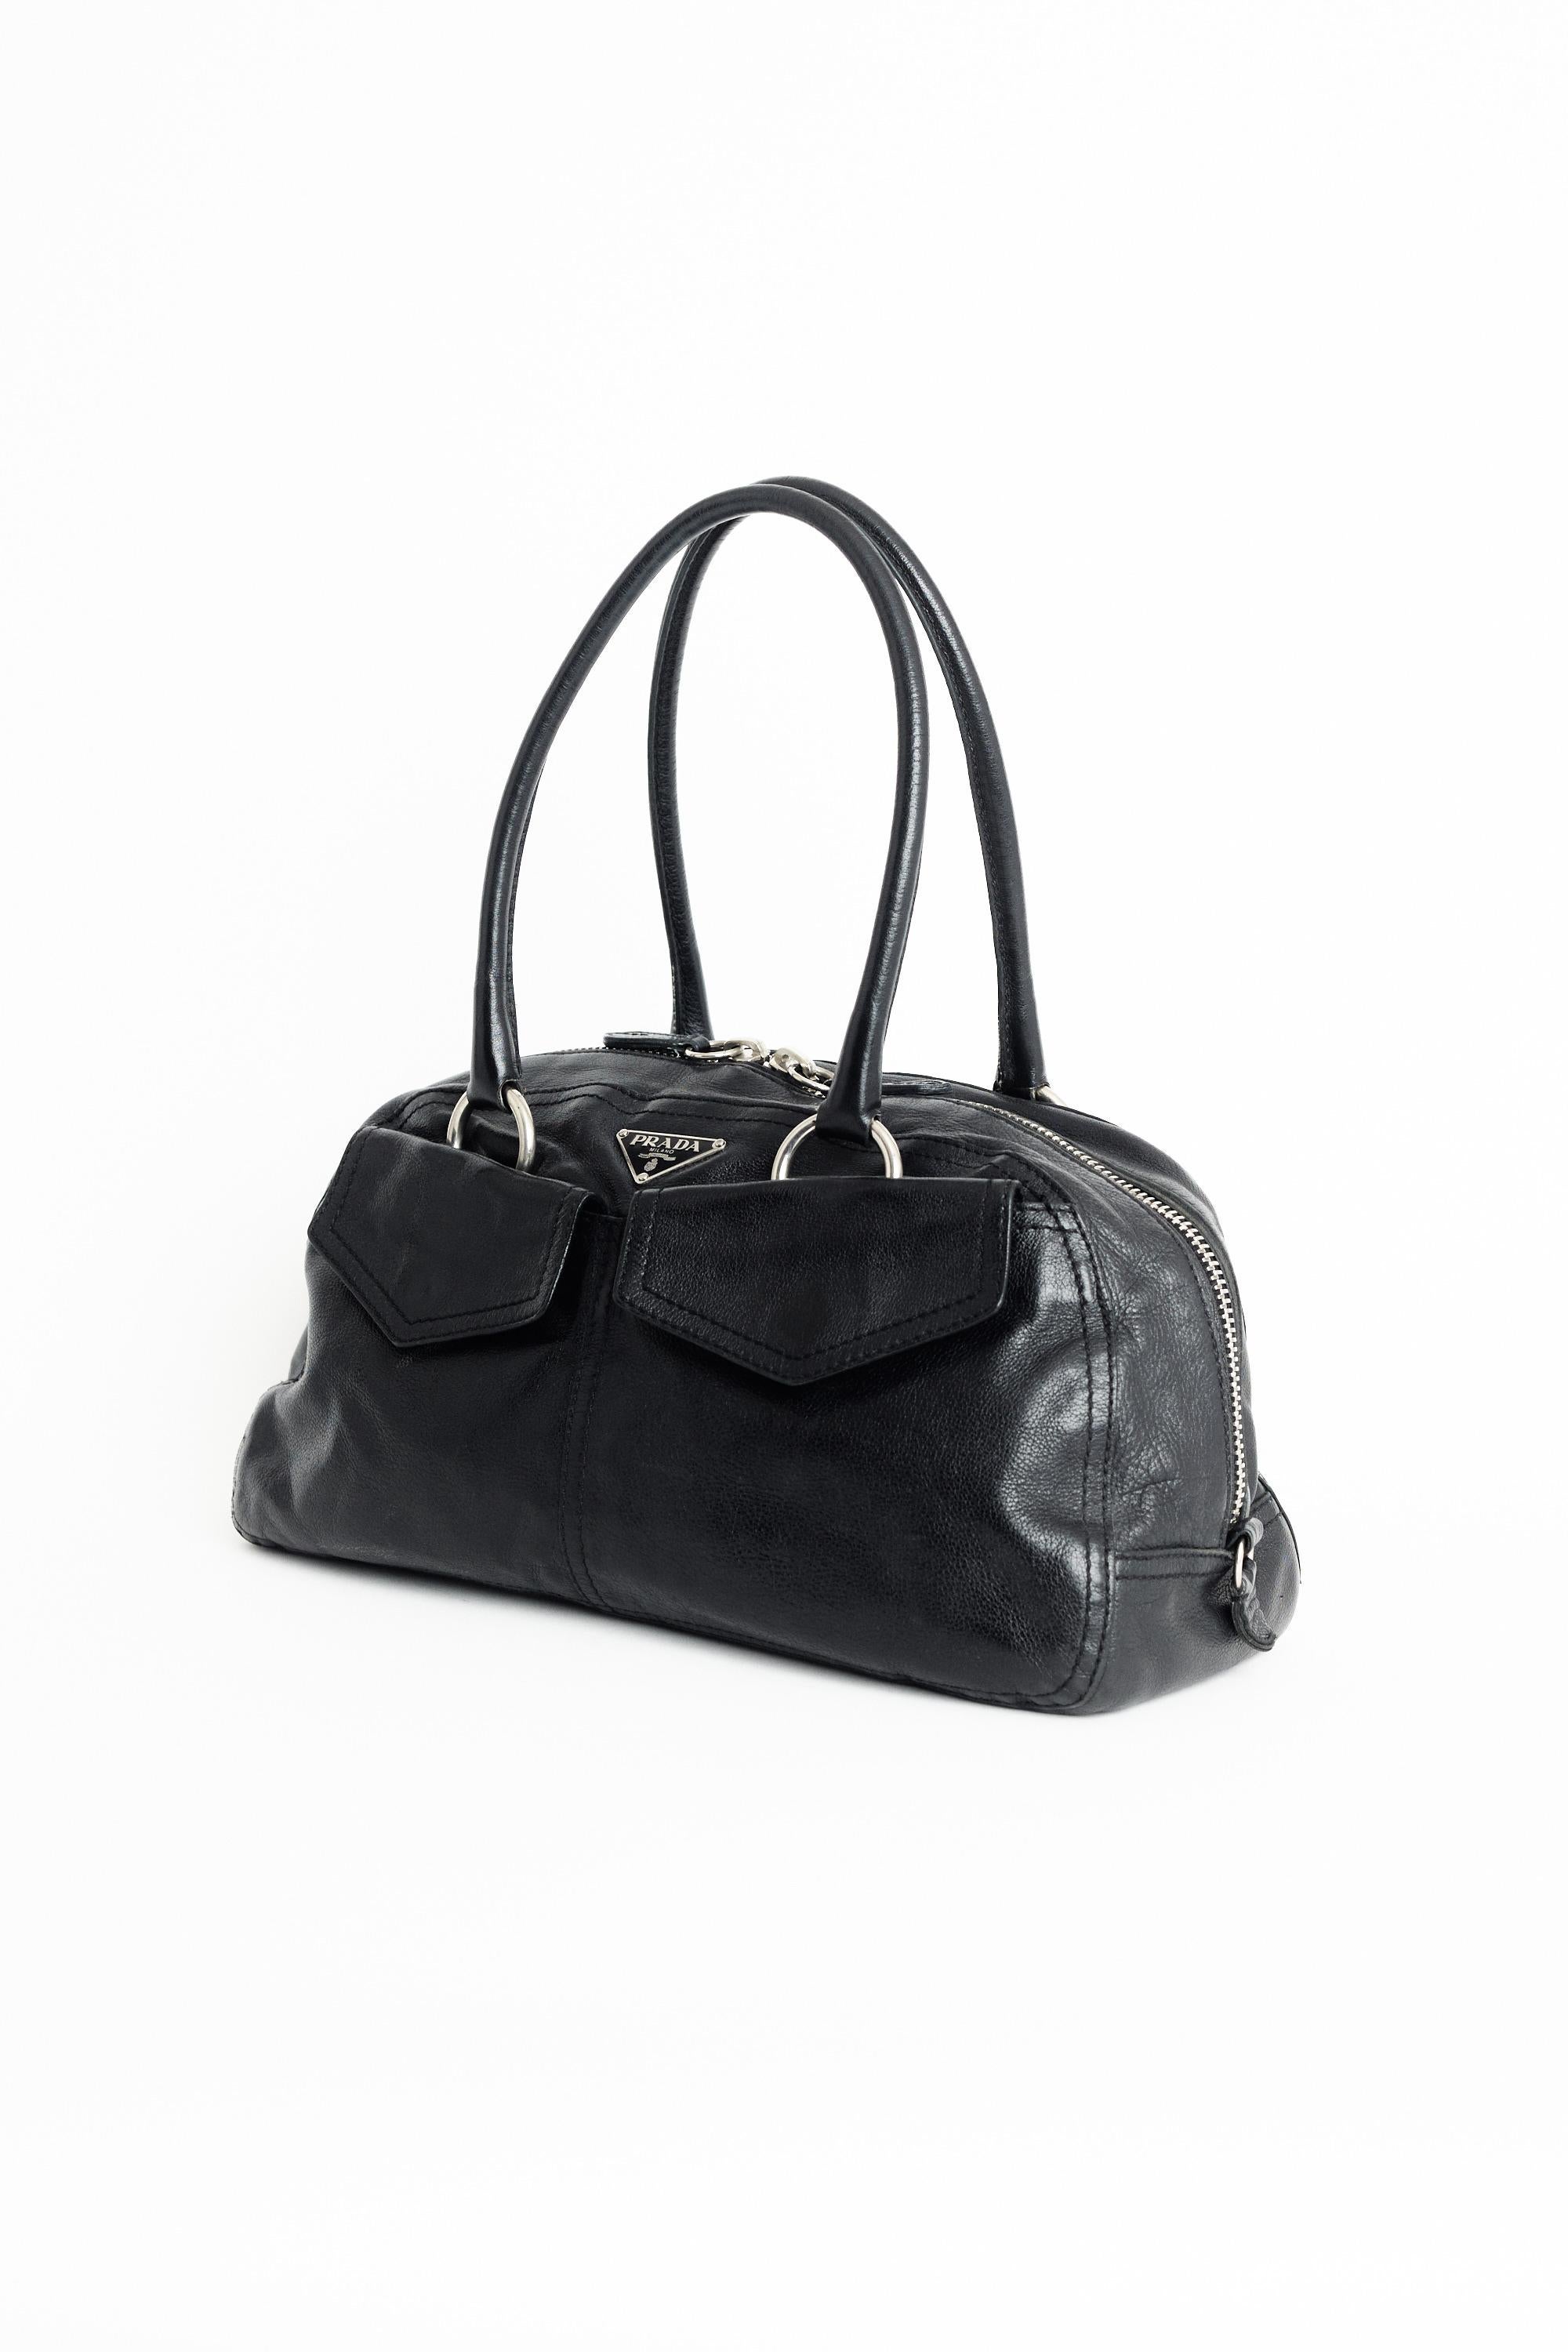 Nordic Poetry is excited to present this iconic Prada 1990’s bowler black leather bag. Features Prada logo hardware, outer pockets, double zip and inside zip back closure. In excellent vintage condition. Authenticity guaranteed.

Fabric: